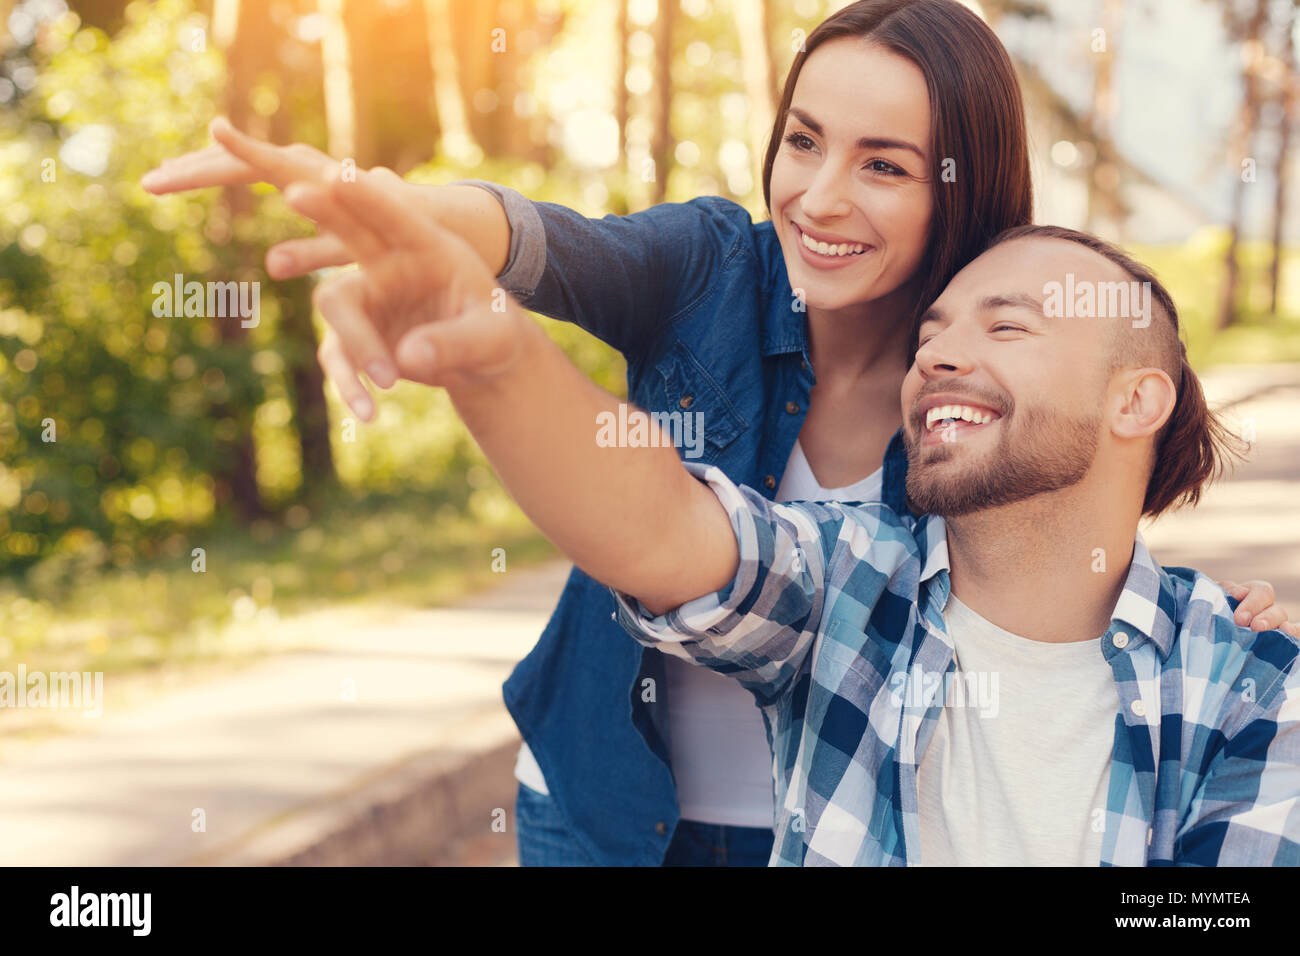 Delighted positive couple laughing Stock Photo